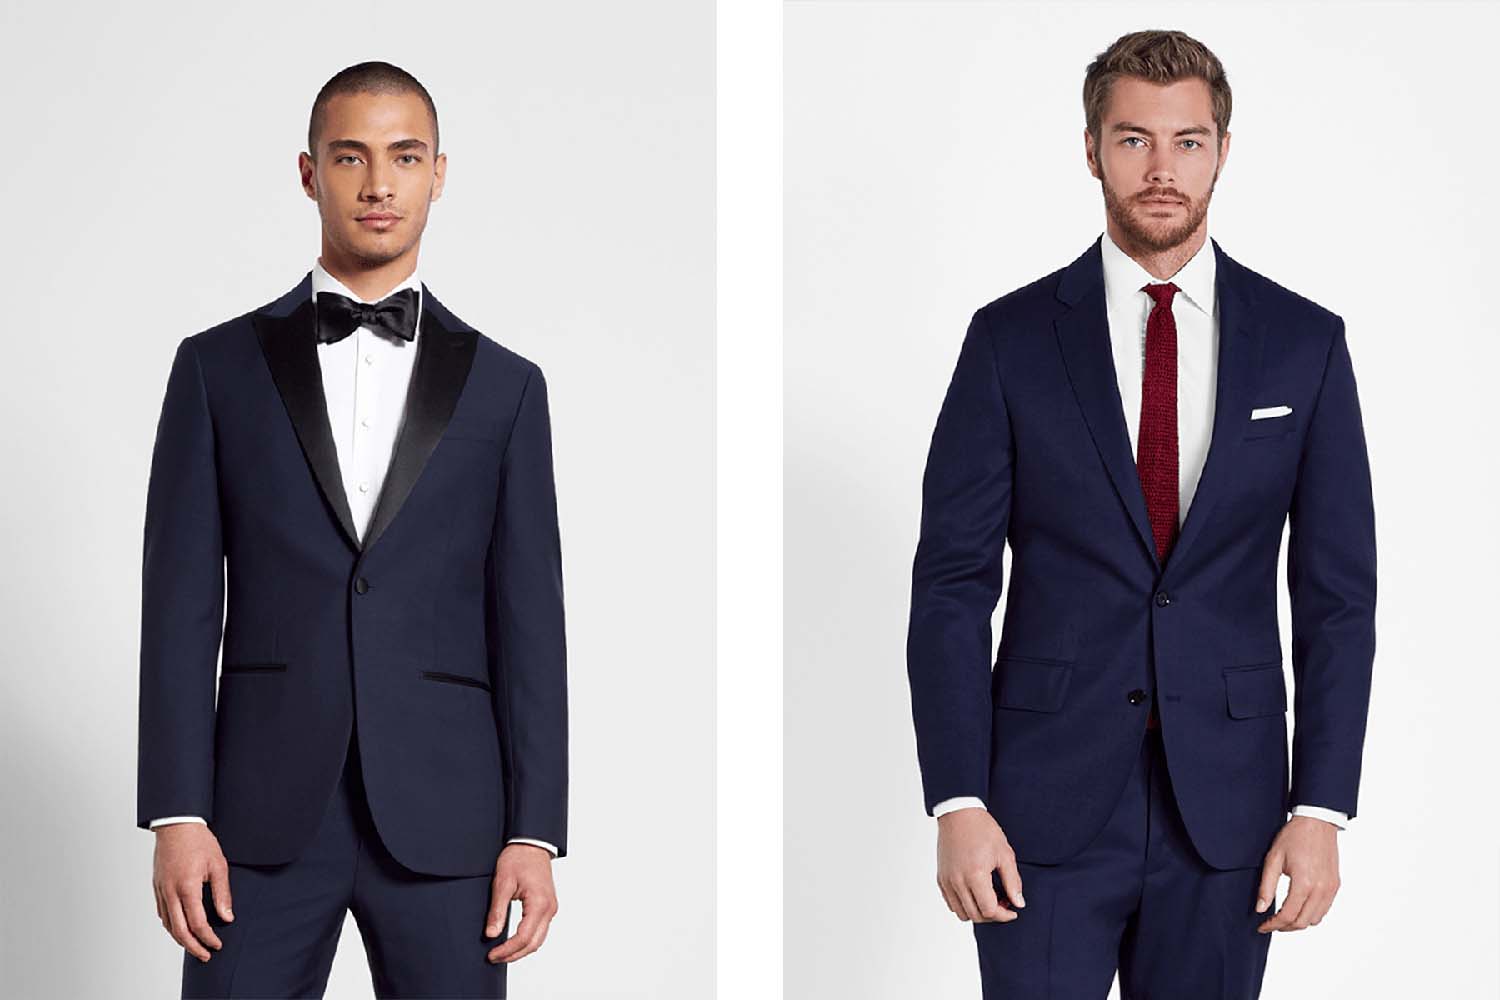 Tuxedo vs Suit: Which Should You Wear on Your Wedding Day in 2022?